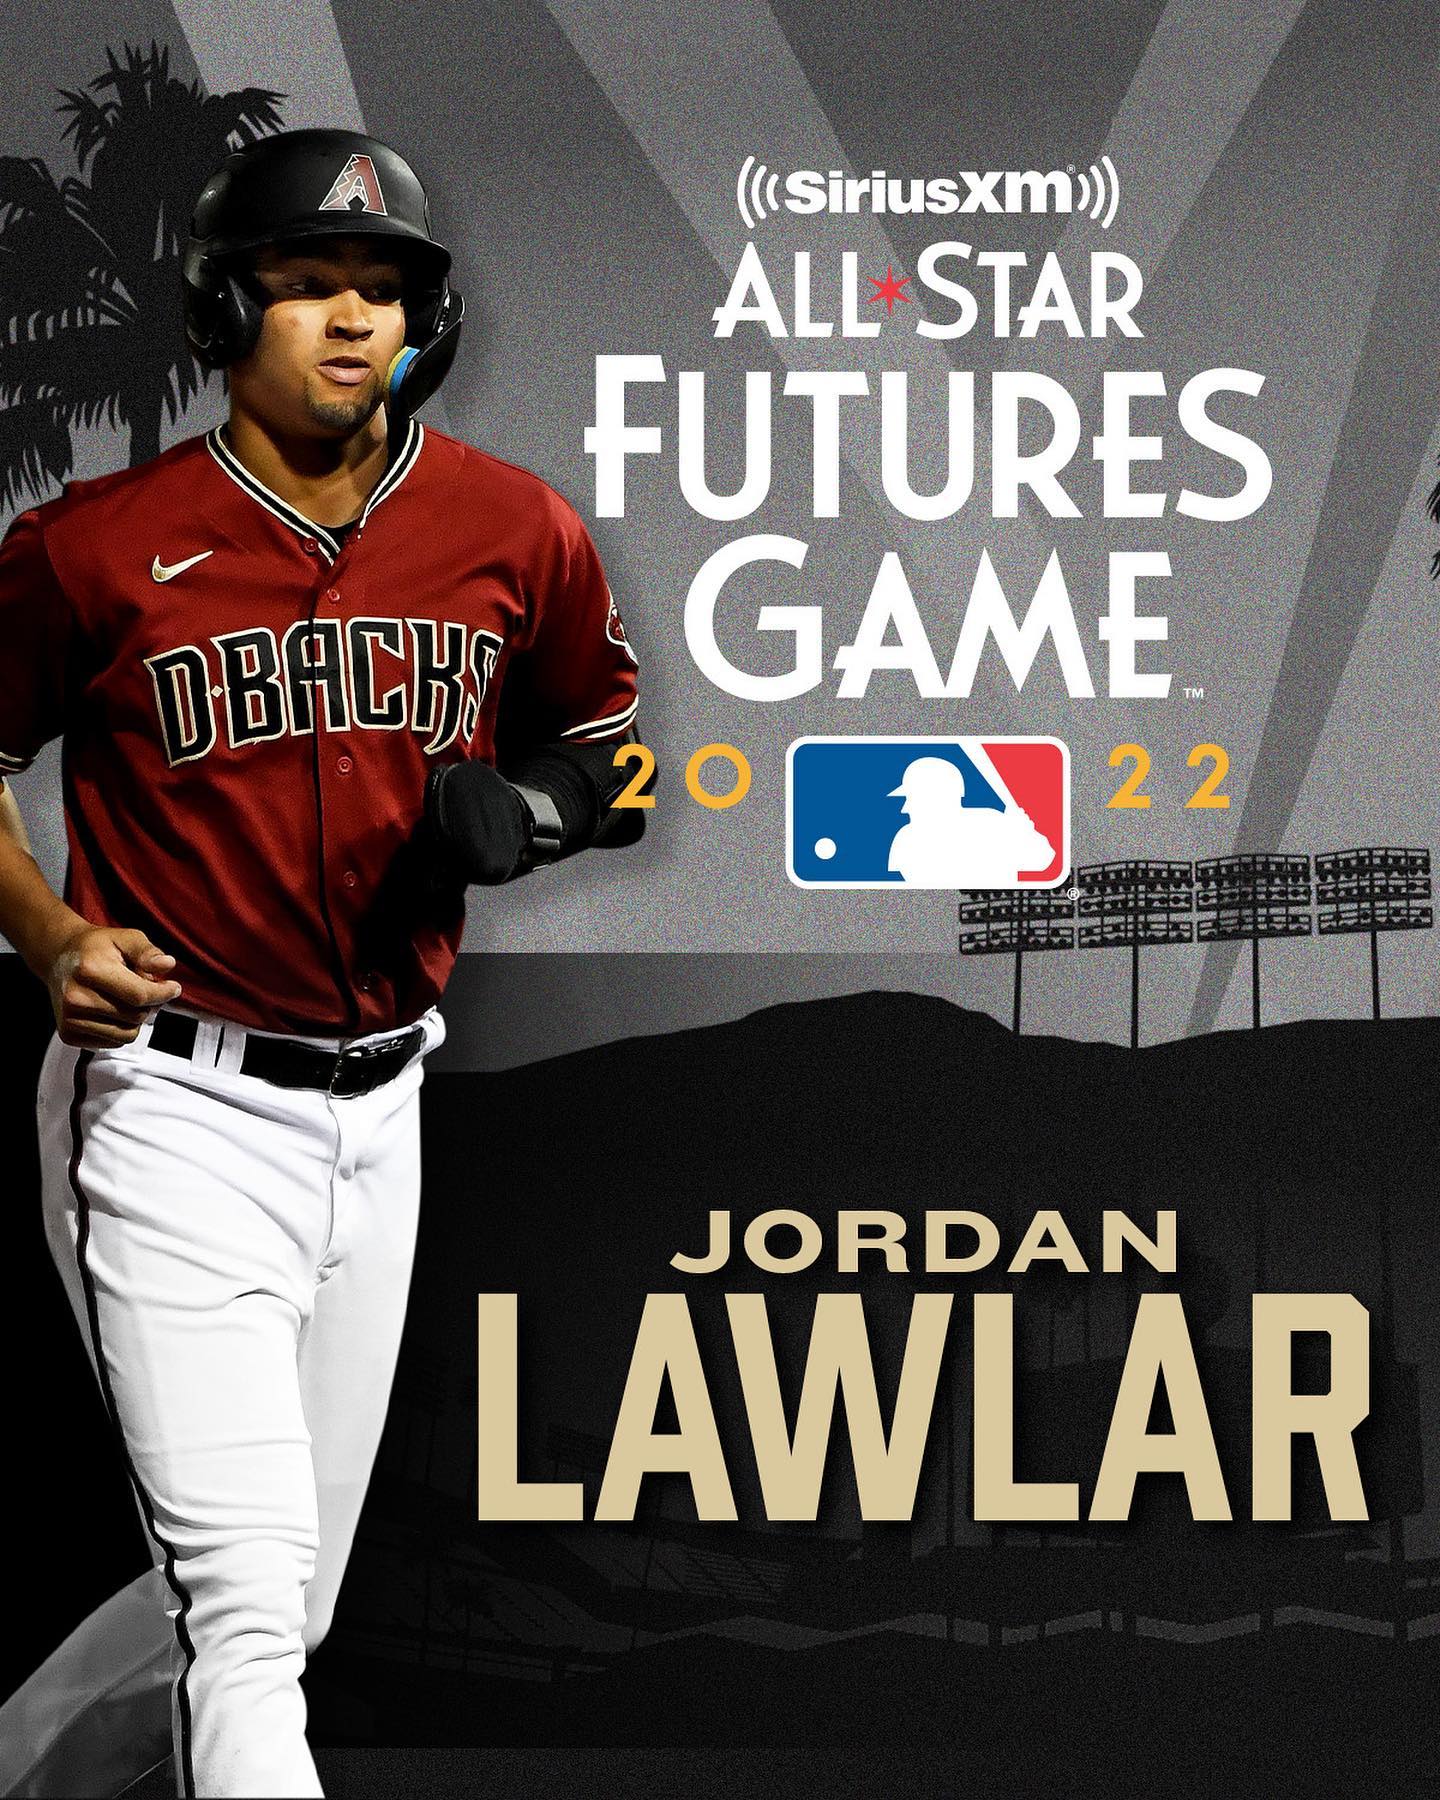 @jordanlawlar is joining Corbin Carroll at this year’s #FuturesGame! Tune in on ...